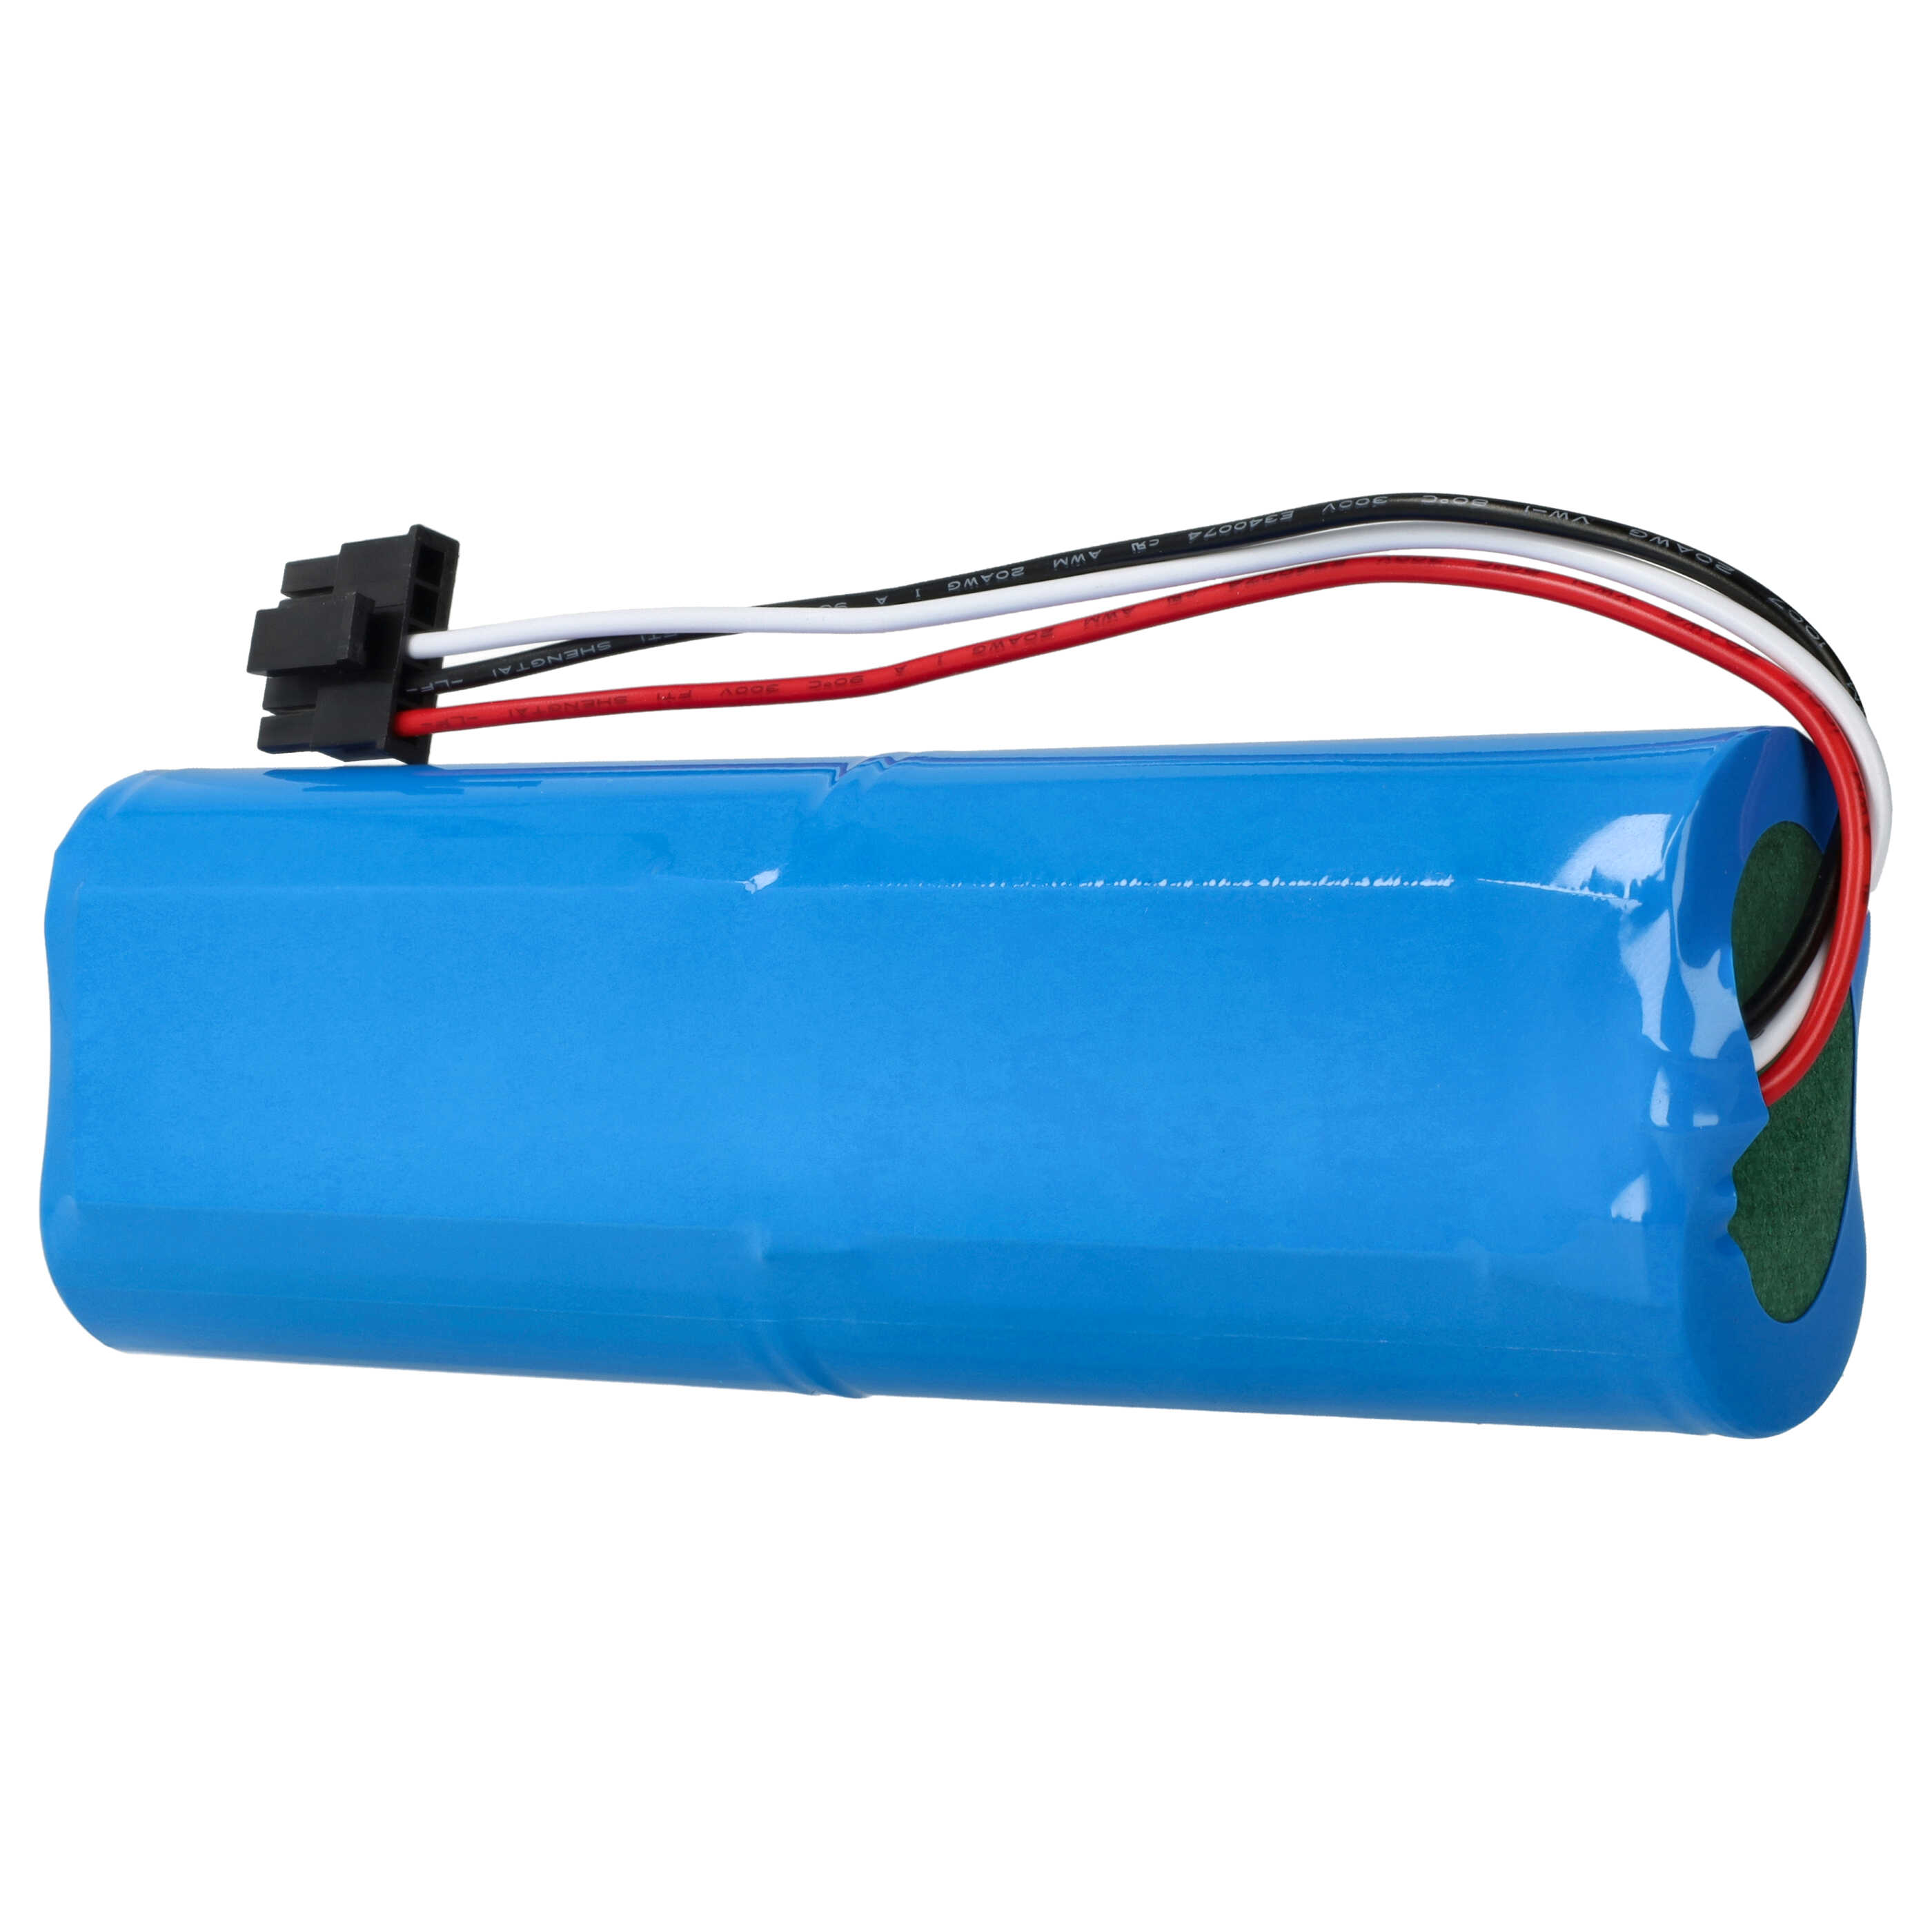 Battery Replacement for Xiaomi 5465V202 for - 4500mAh, 14.4V, Li-Ion